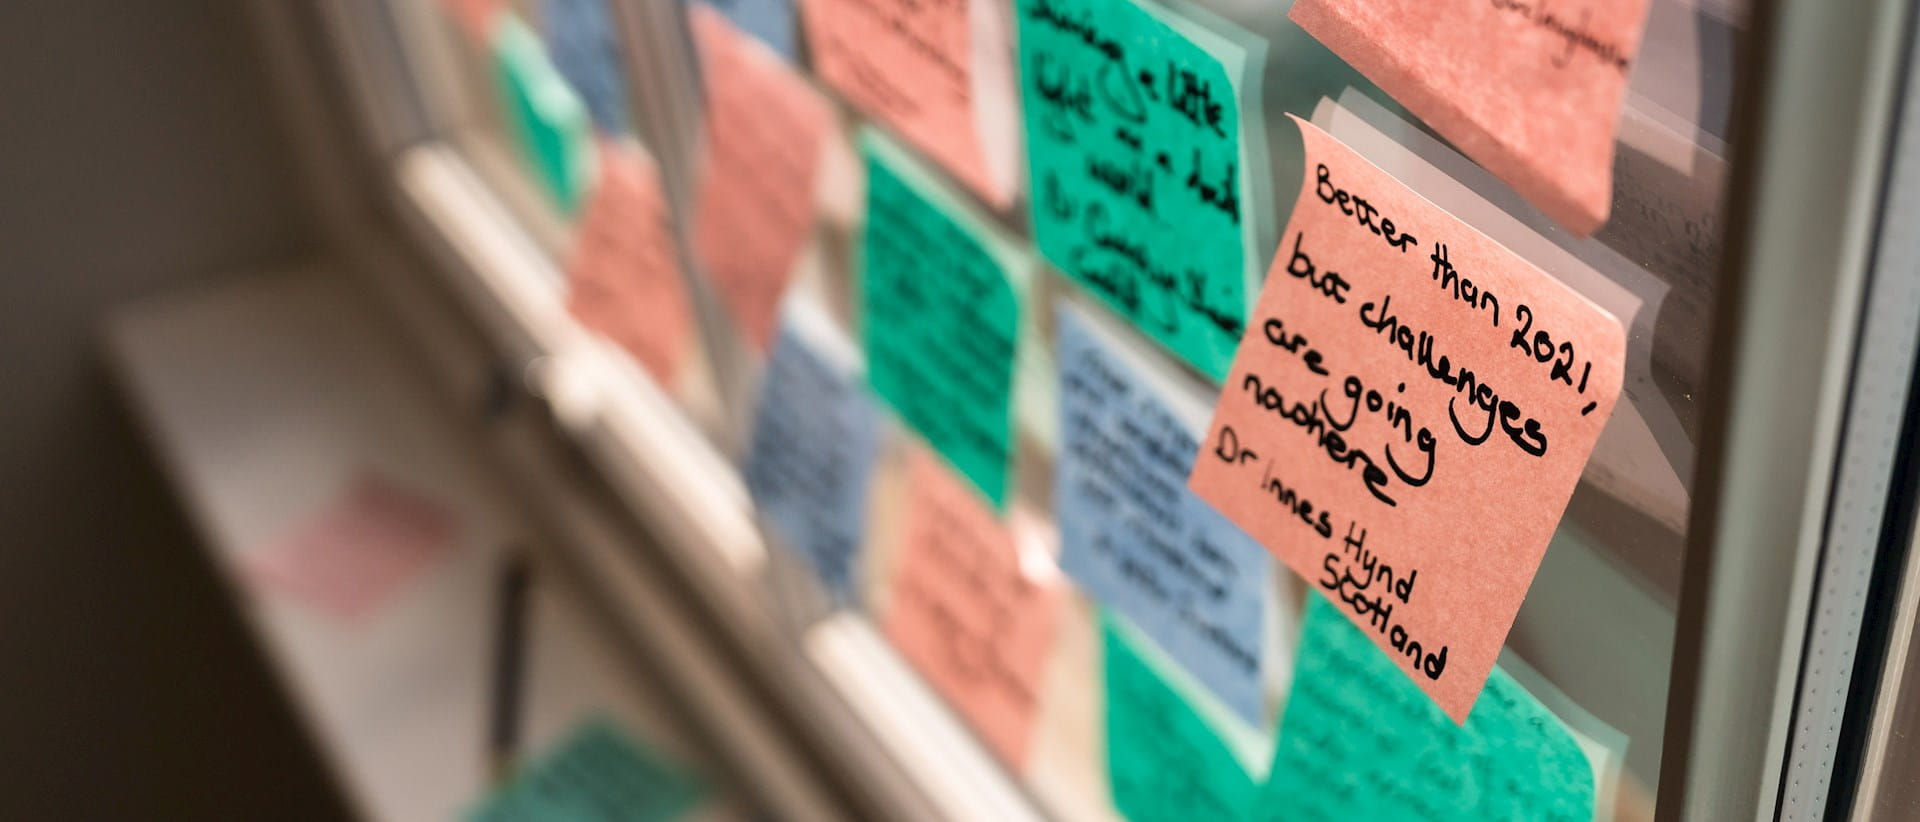 Comments from MDDUS members on post-it notes